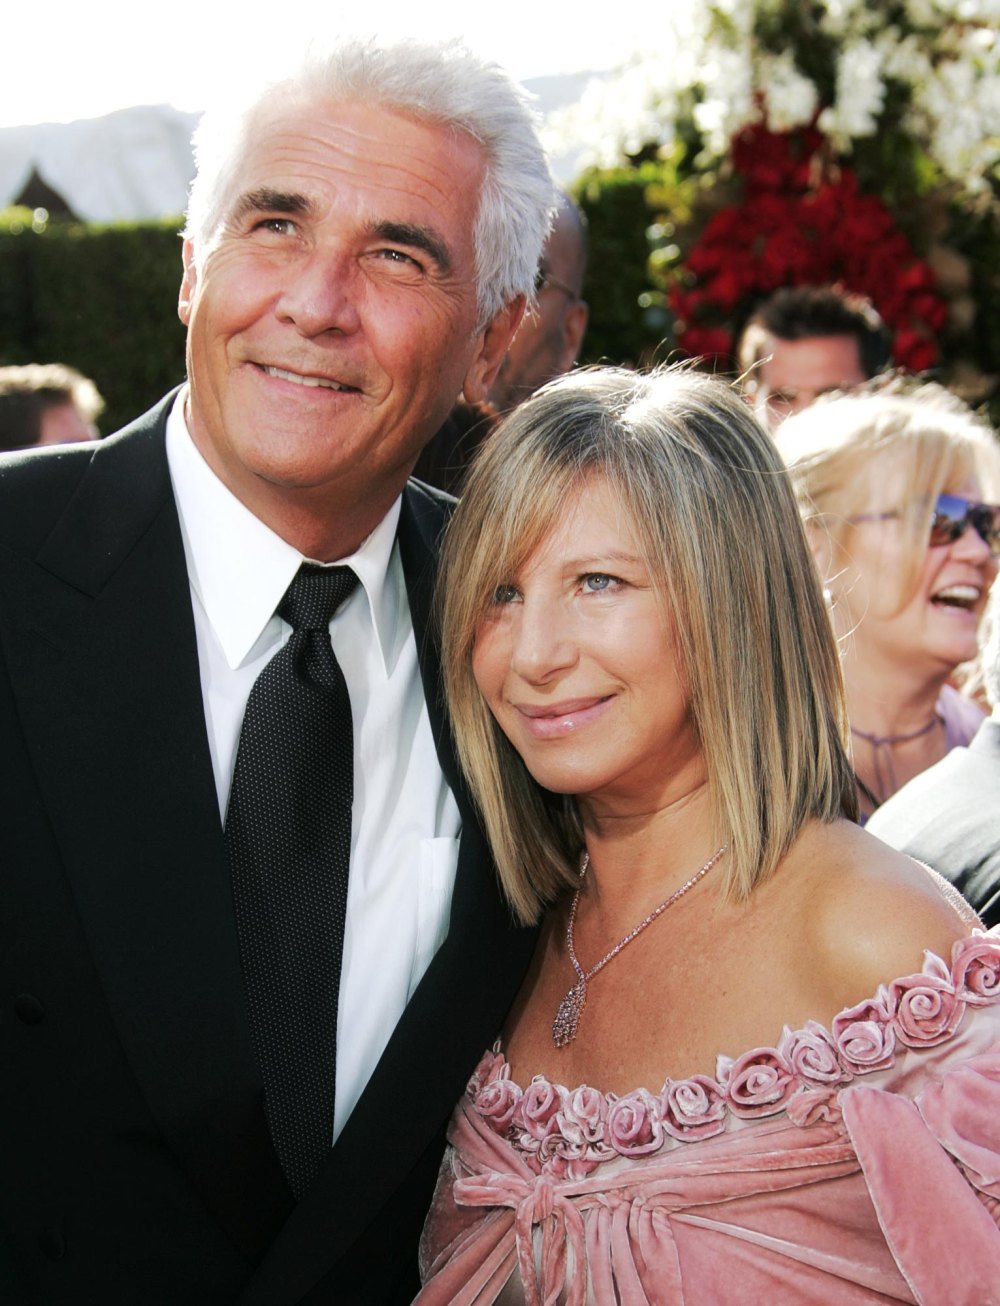 Barbra Streisand and Husband James Brolin s Relationship Timeline From a Blind Date to Wedded Bliss 232